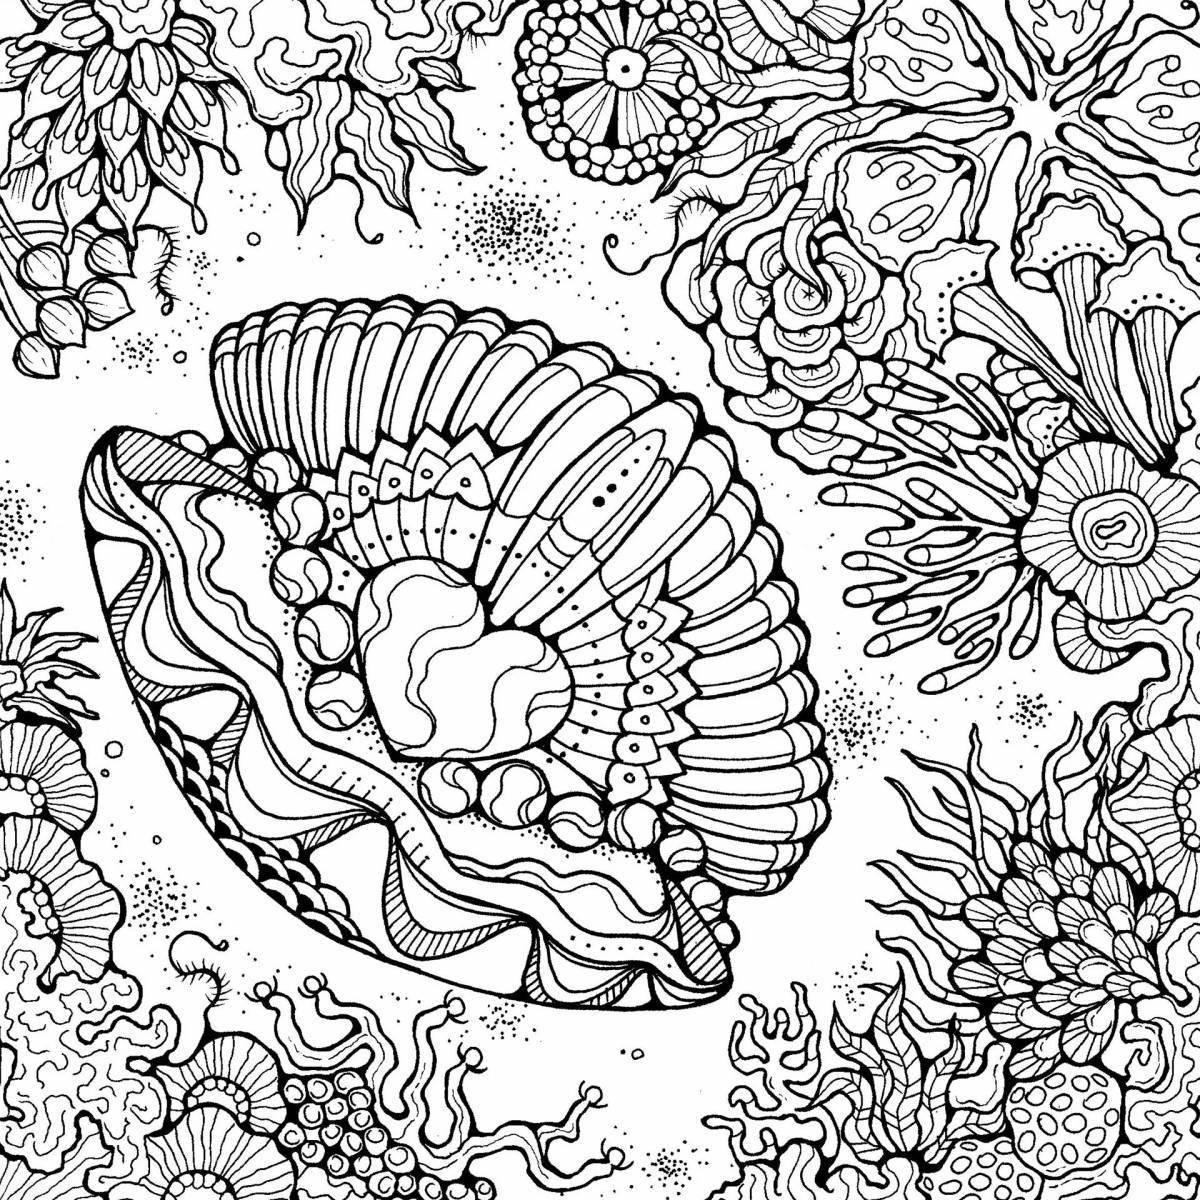 Refreshing coloring book best for adults